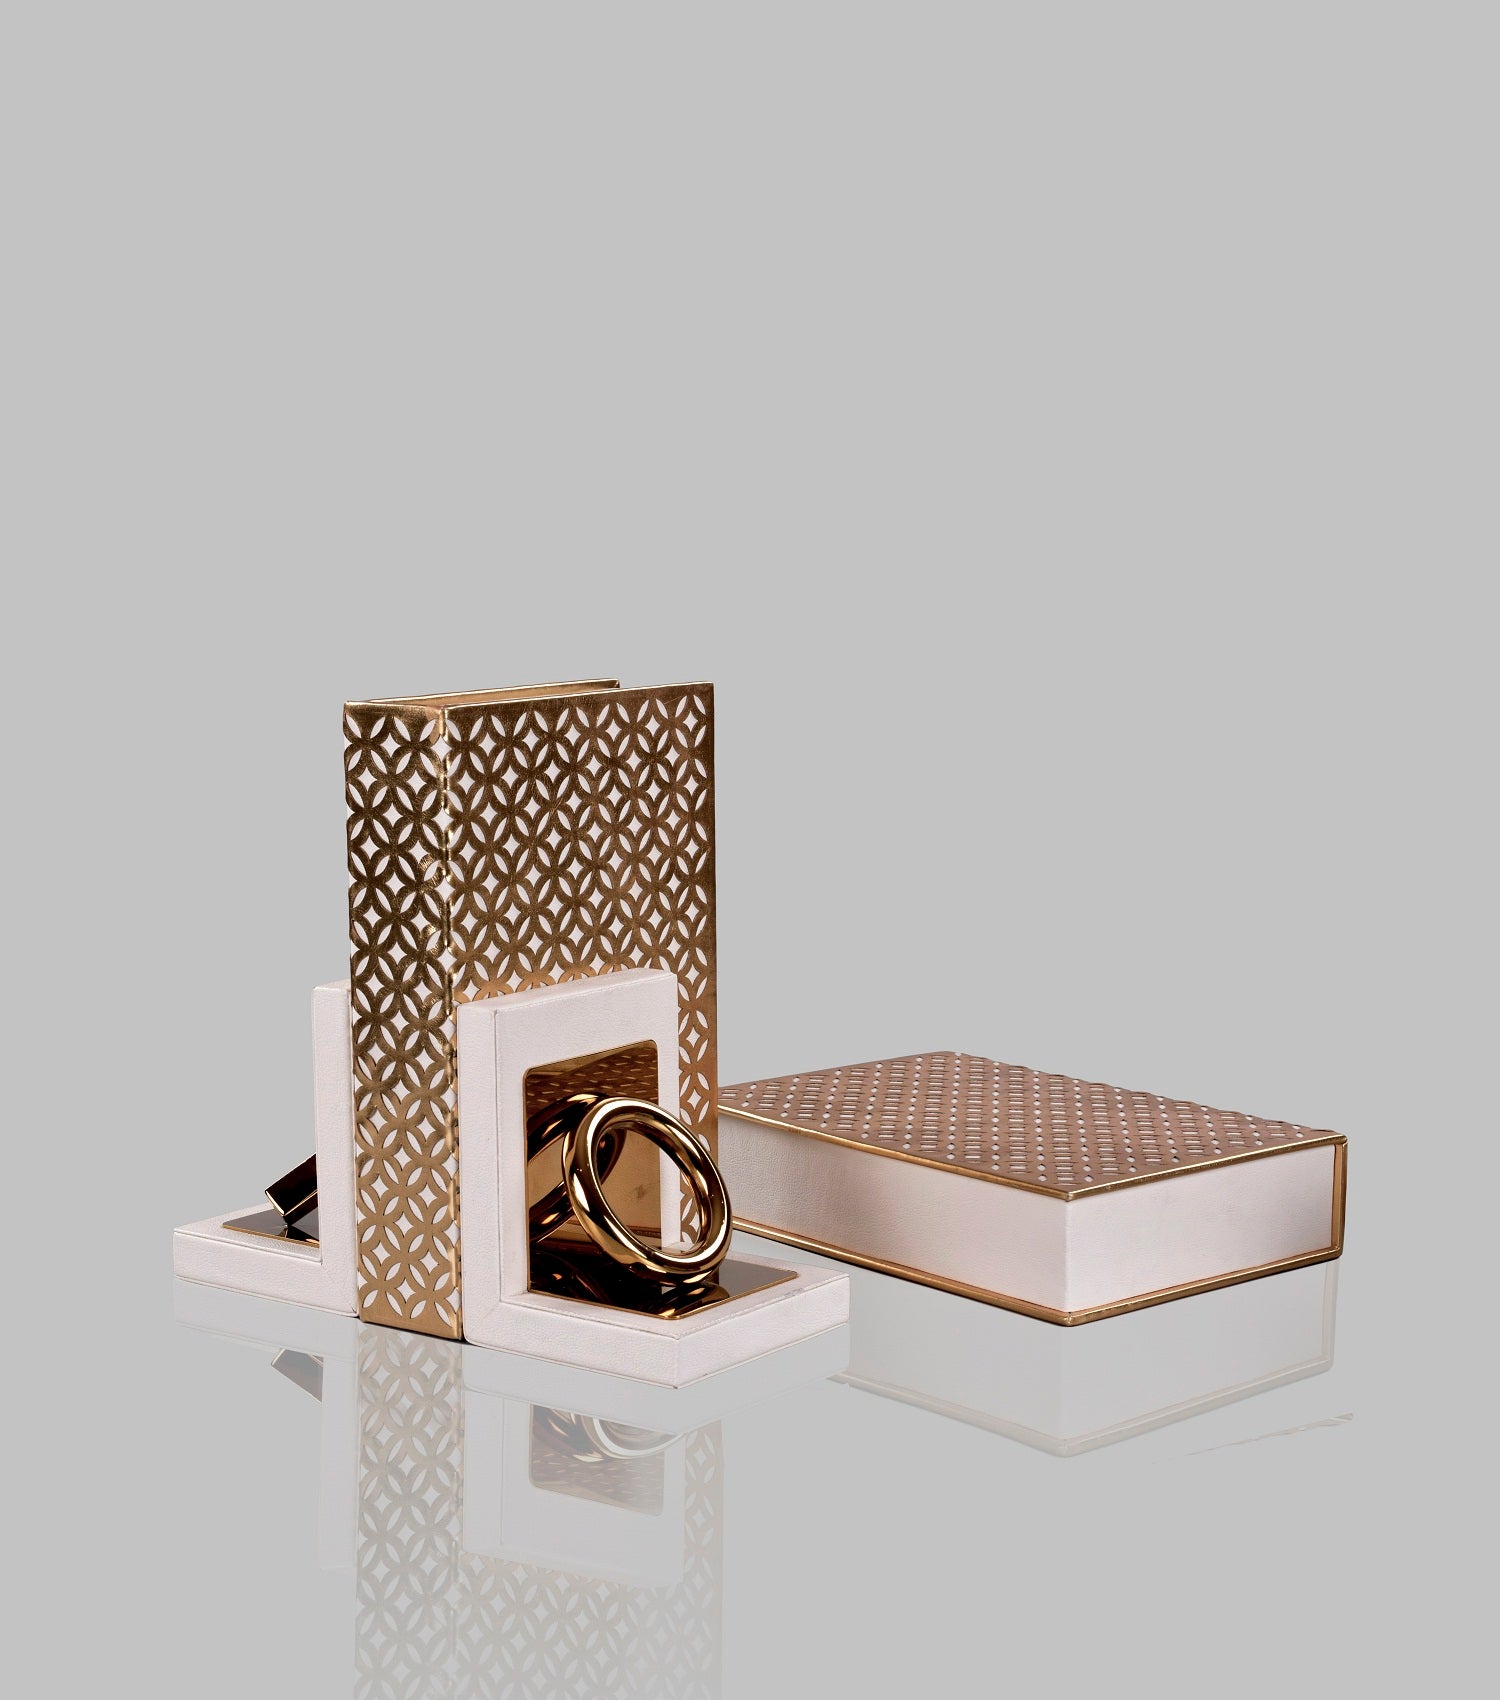 Fretwork book cover white and gold